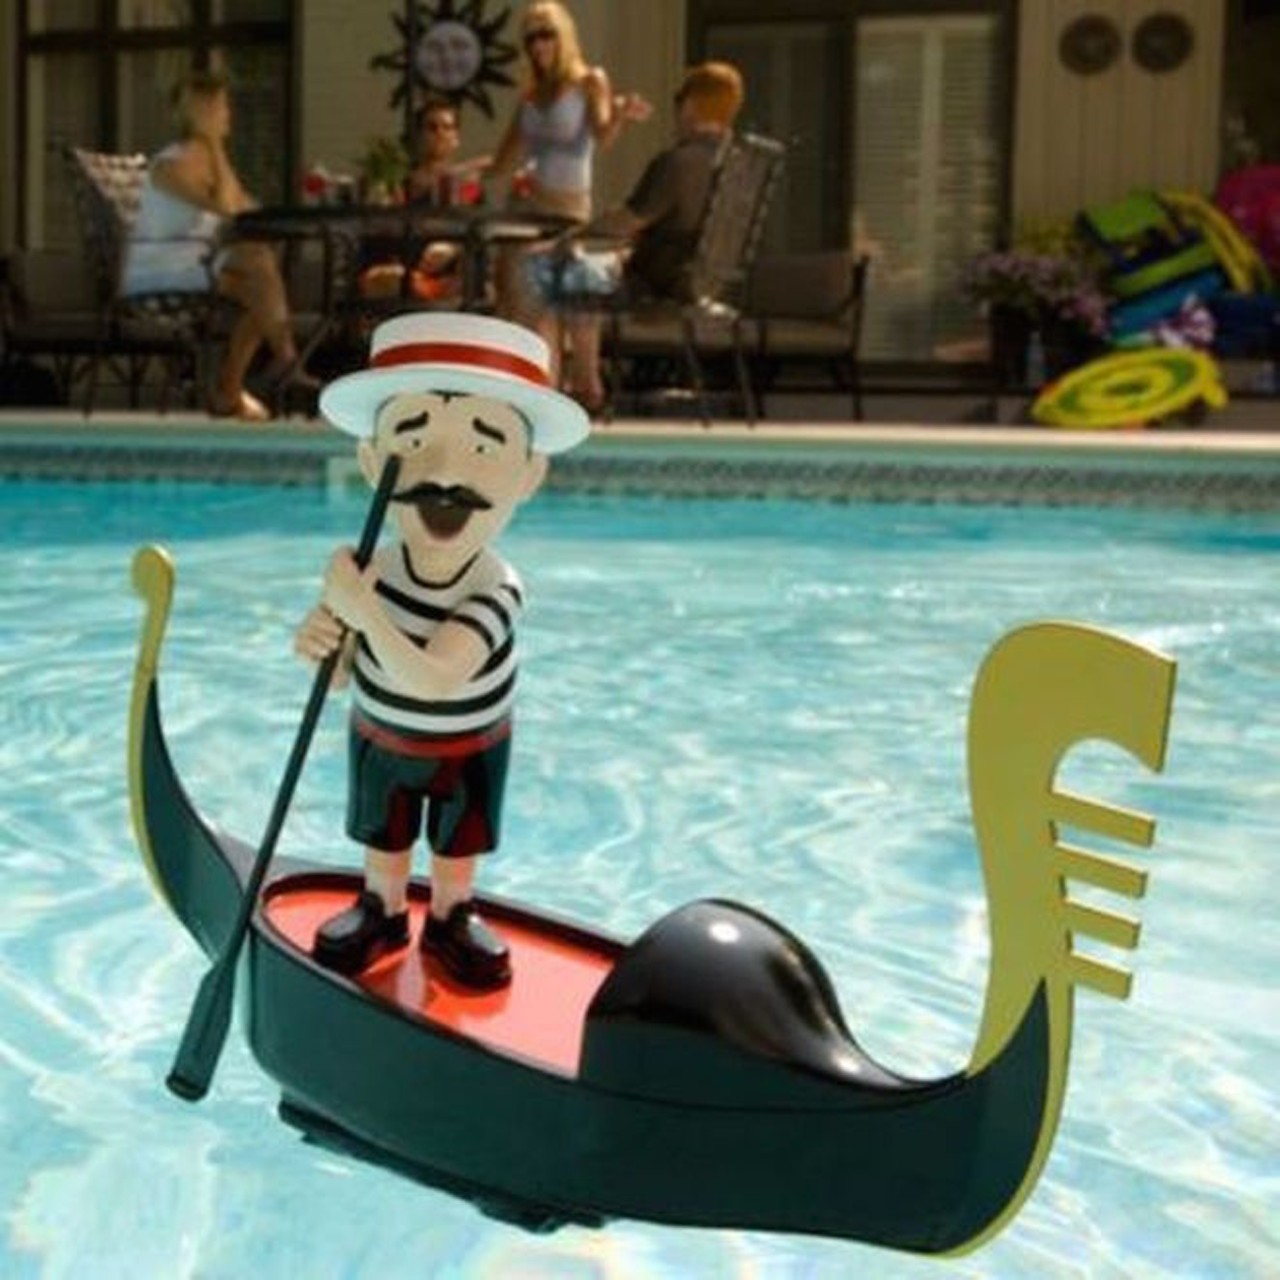 A singing gondolier for your pool.